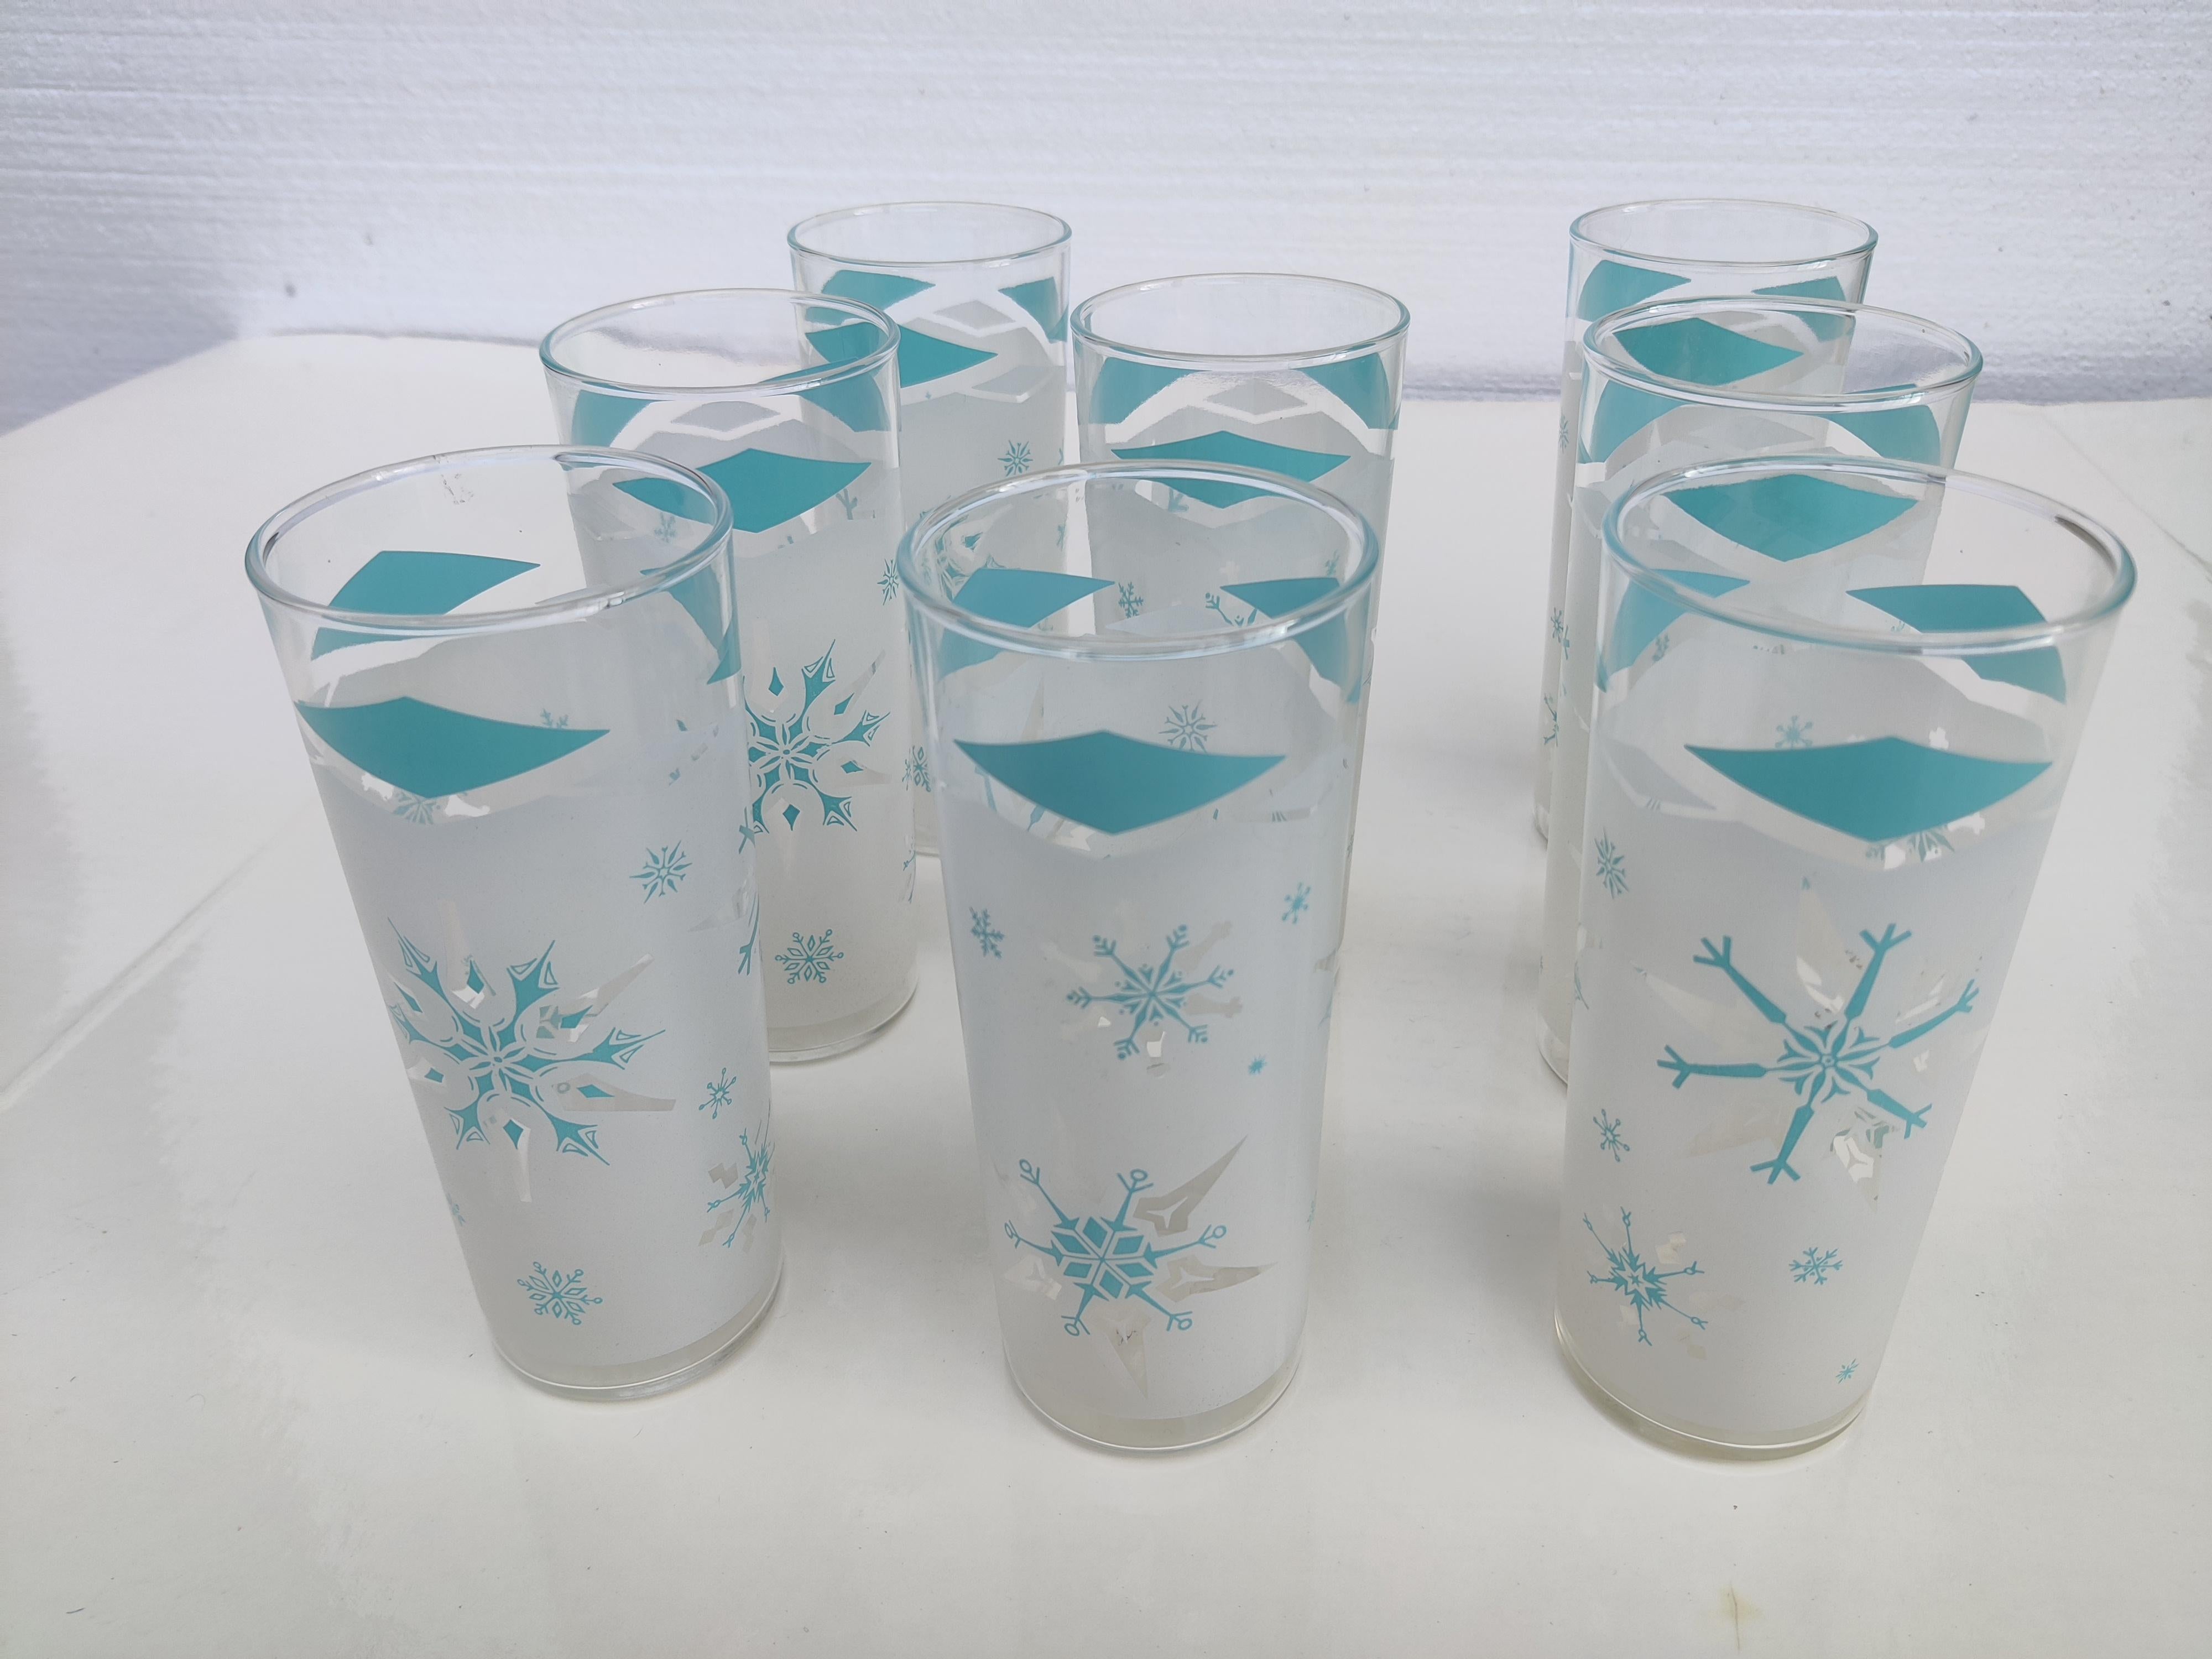 Mid-century Anchor Hocking Atomic Snowflake Glasses Set of 8
Aqua blue frosted Tom Collins Glasses